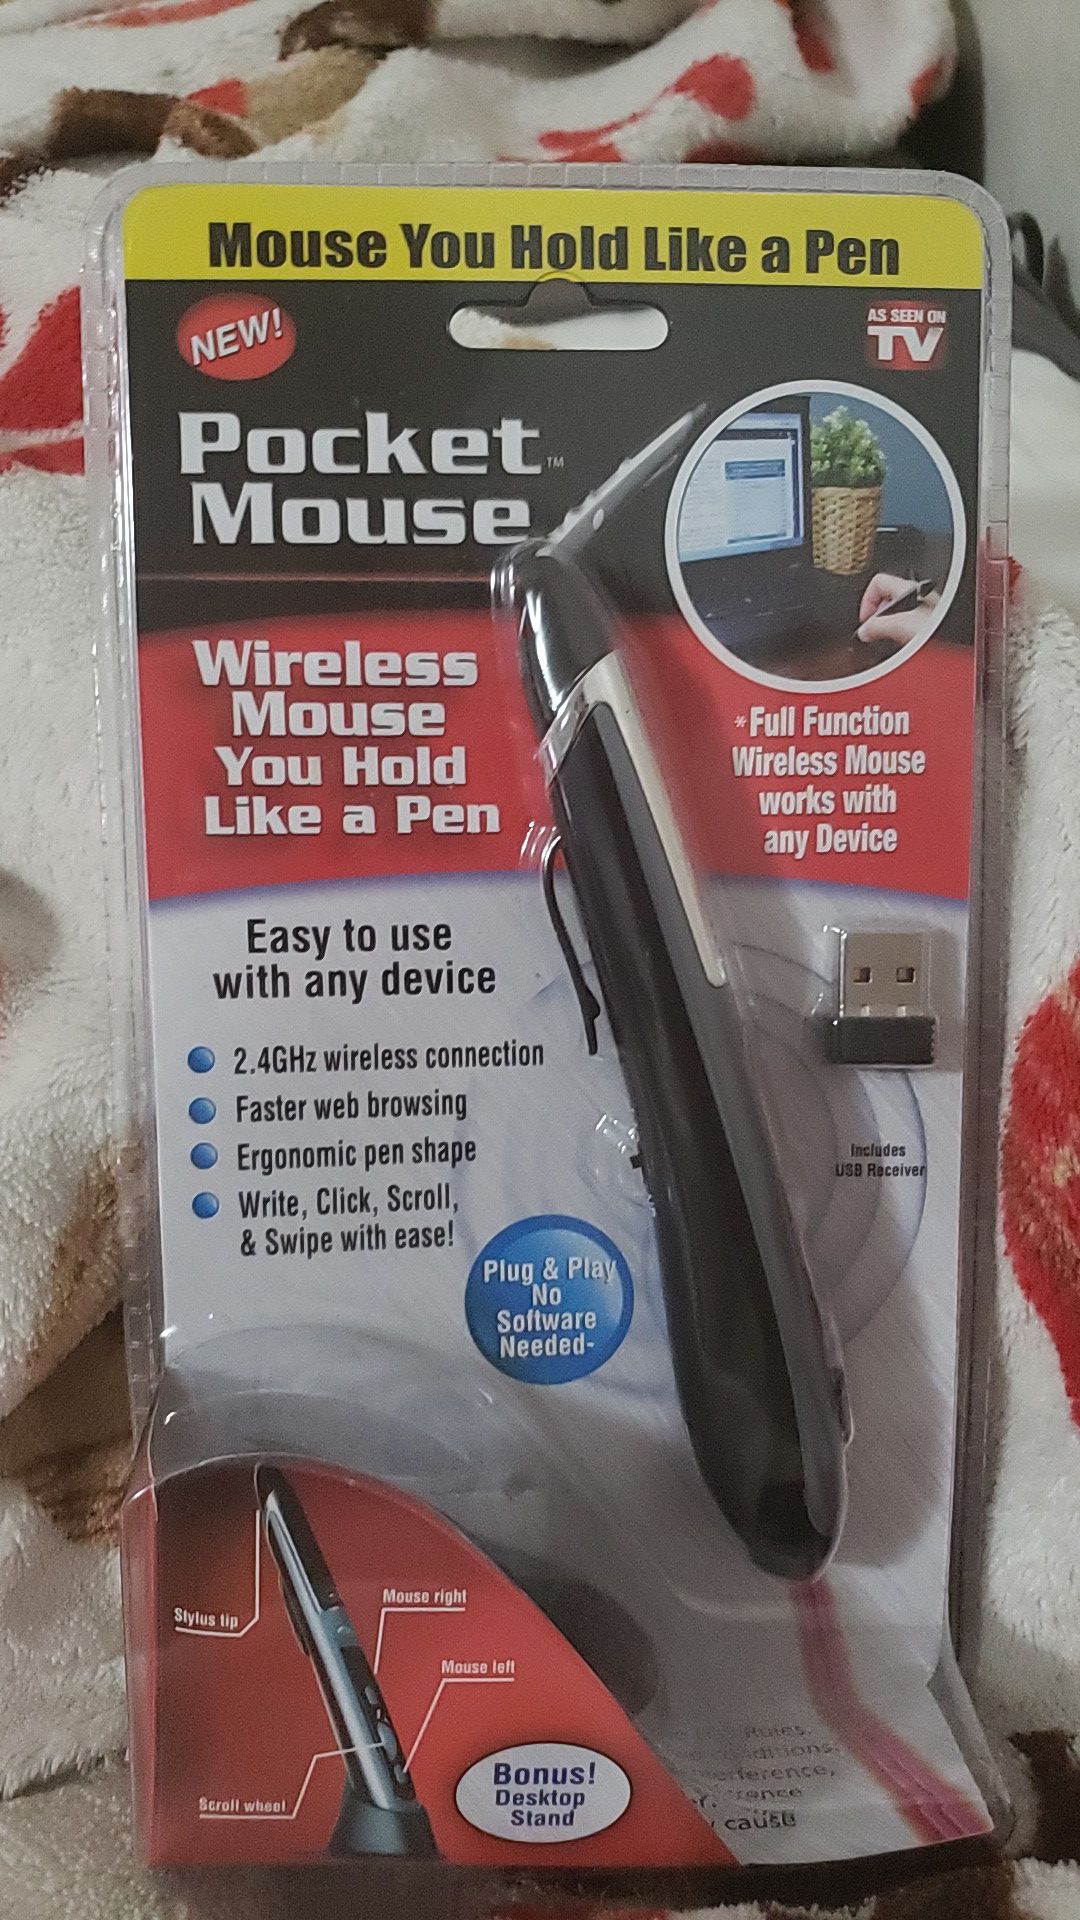 Pocket Mouse Wireless Mouse